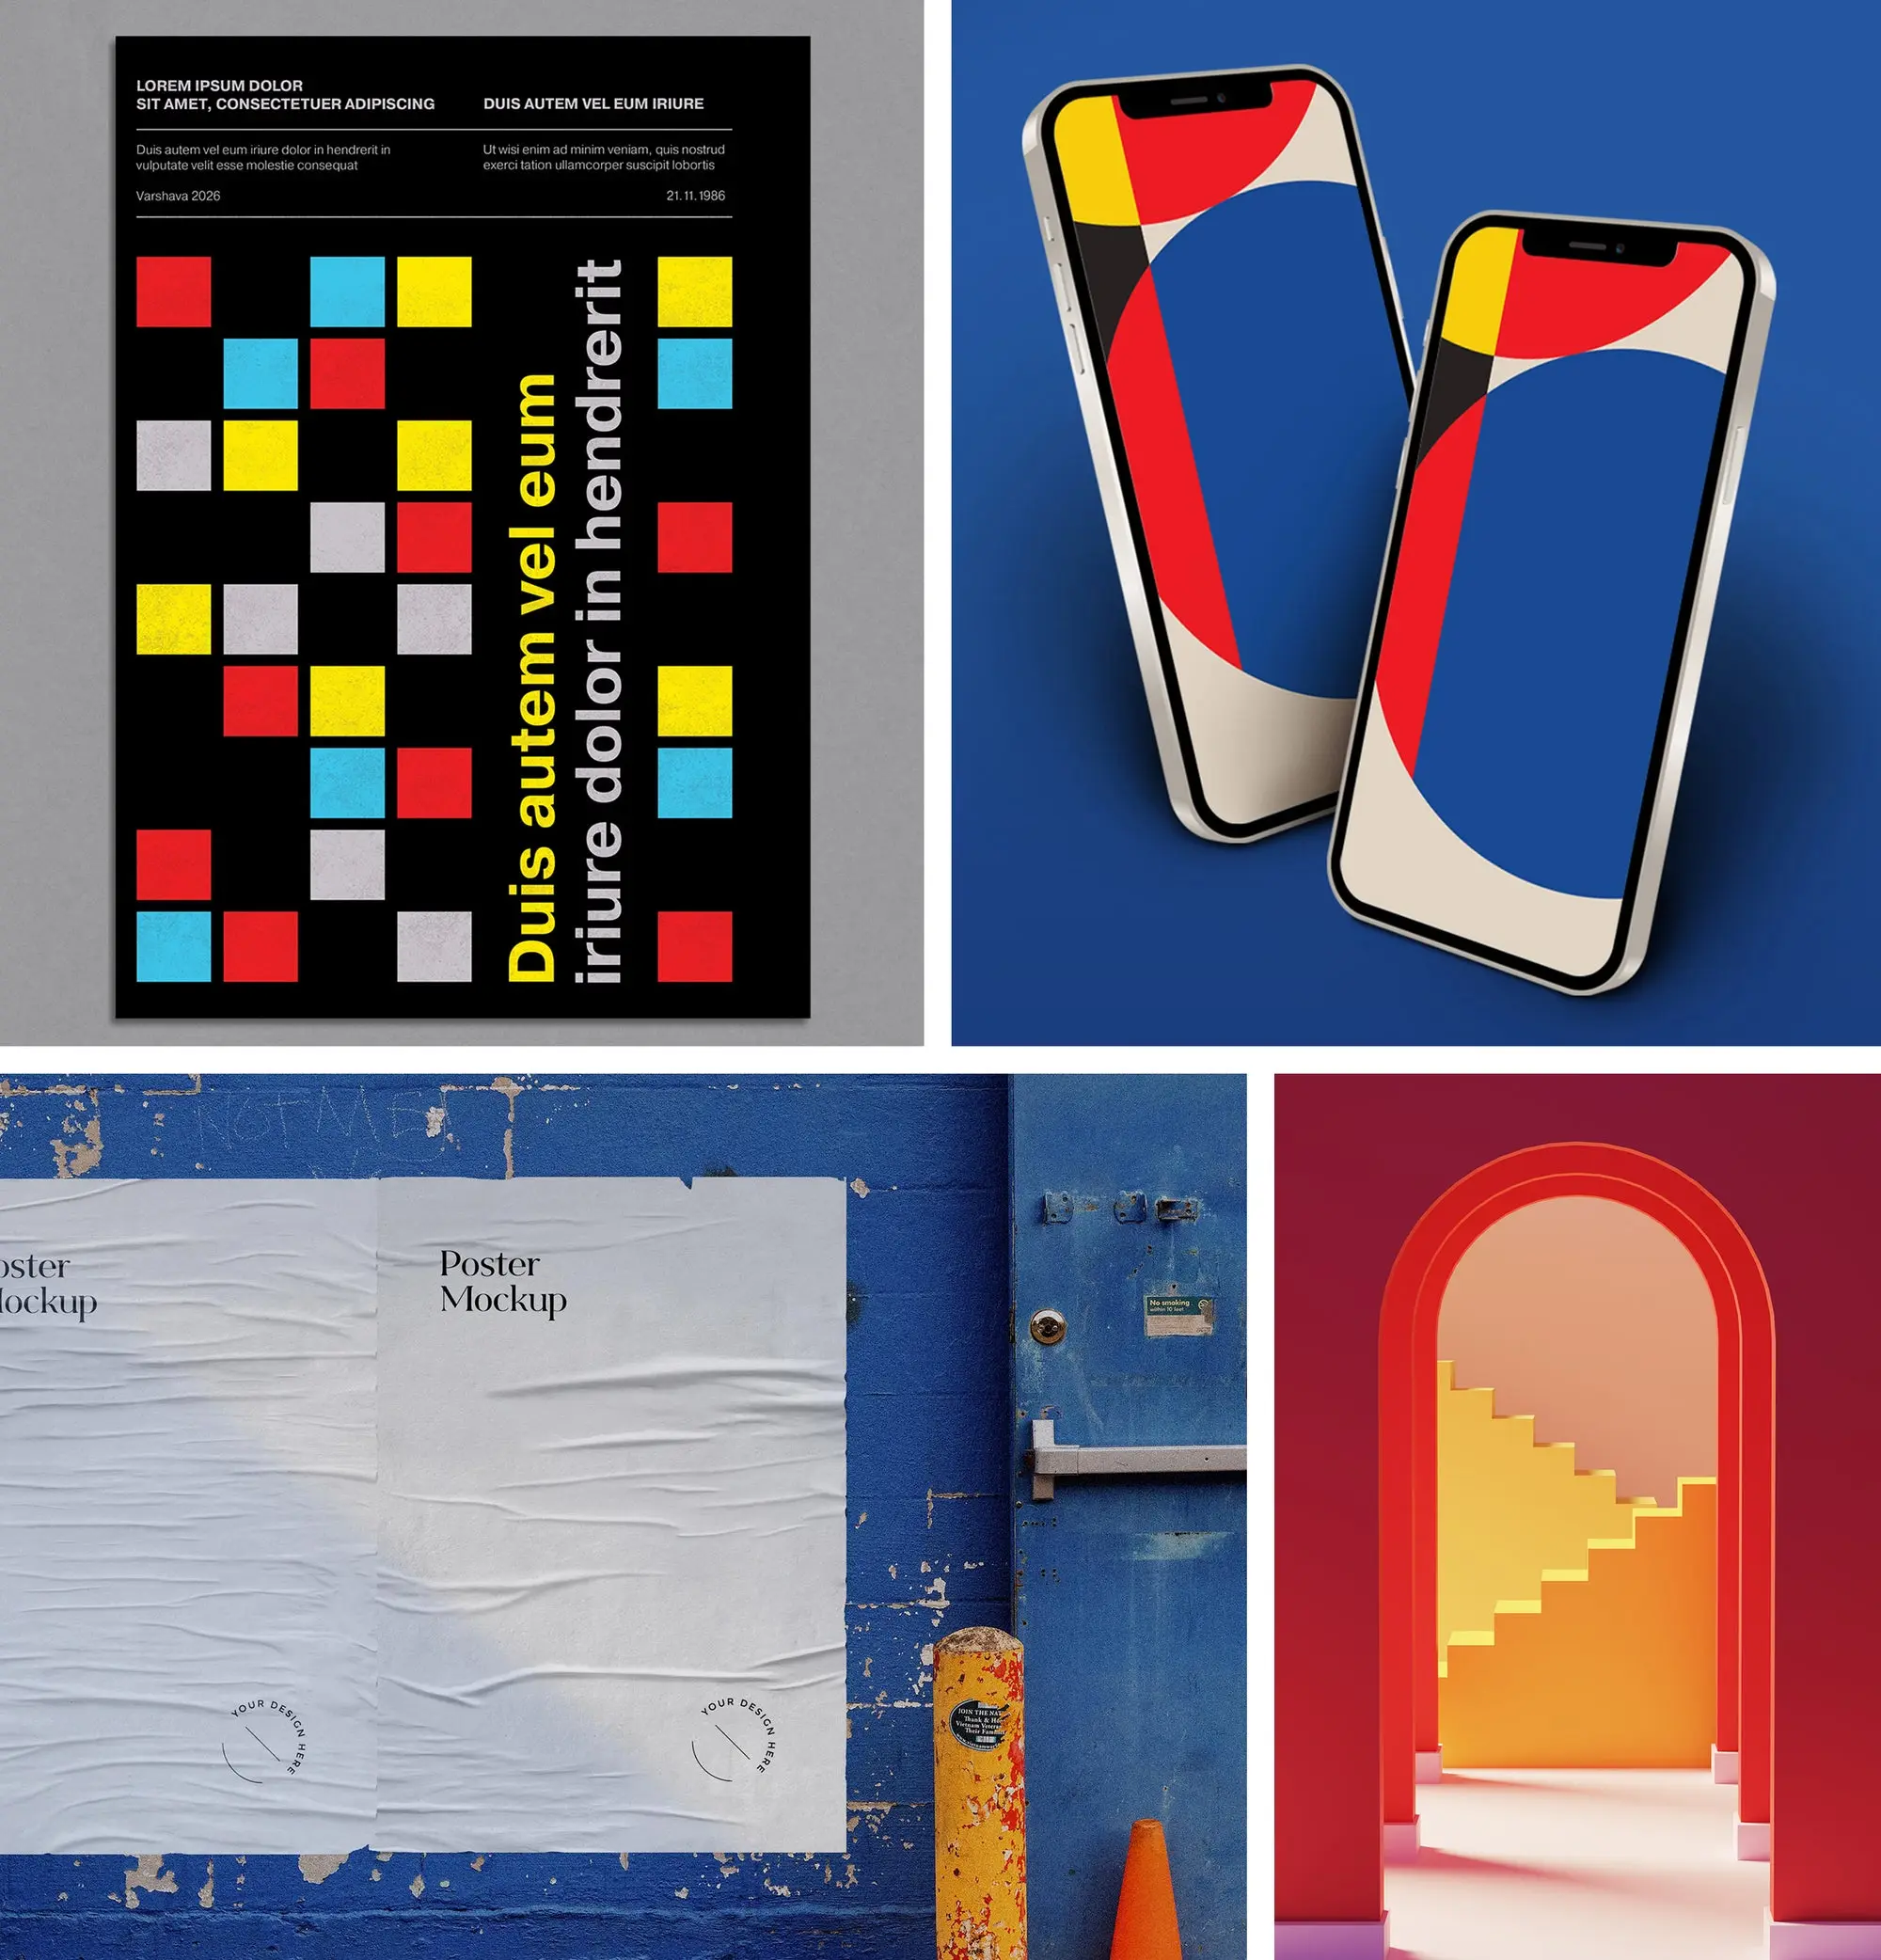 A collage using a signature look of the Bauhaus, especially color-blocked primaries.